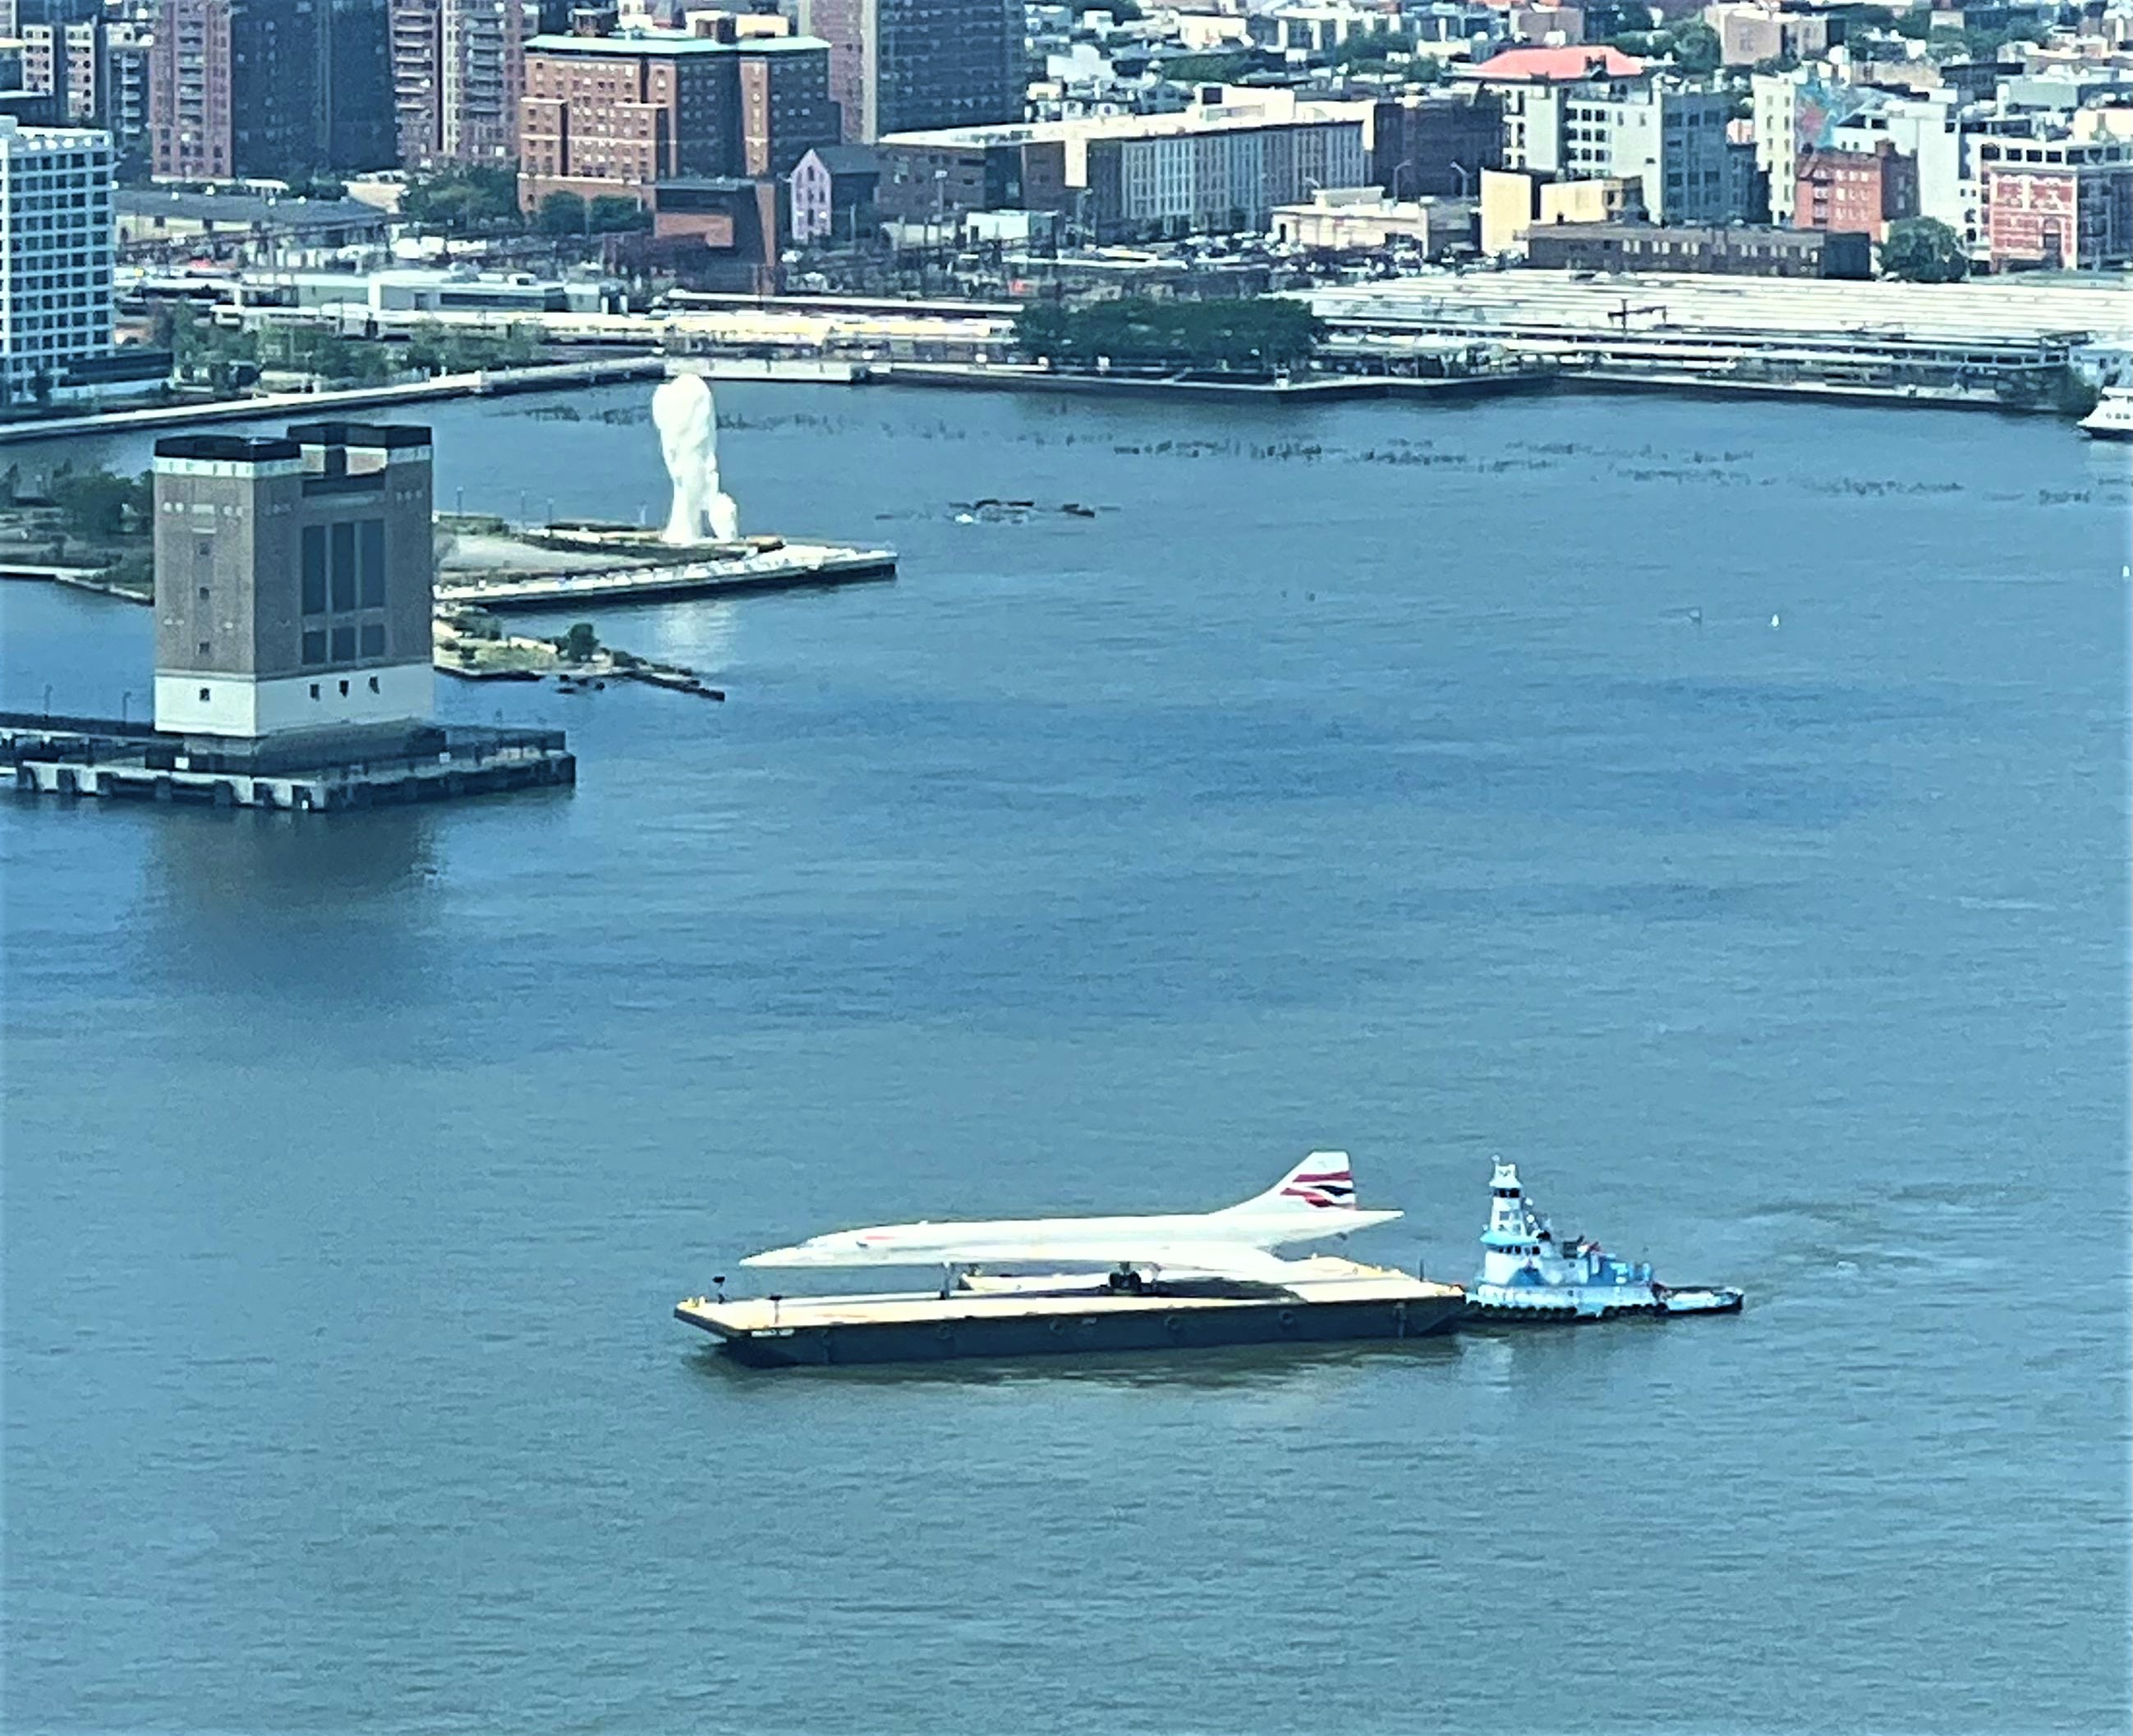 British Airways  Concorde took  a  Slow boat  from  Intrepid  Museum  for  Restoration  in  Brooklyn.